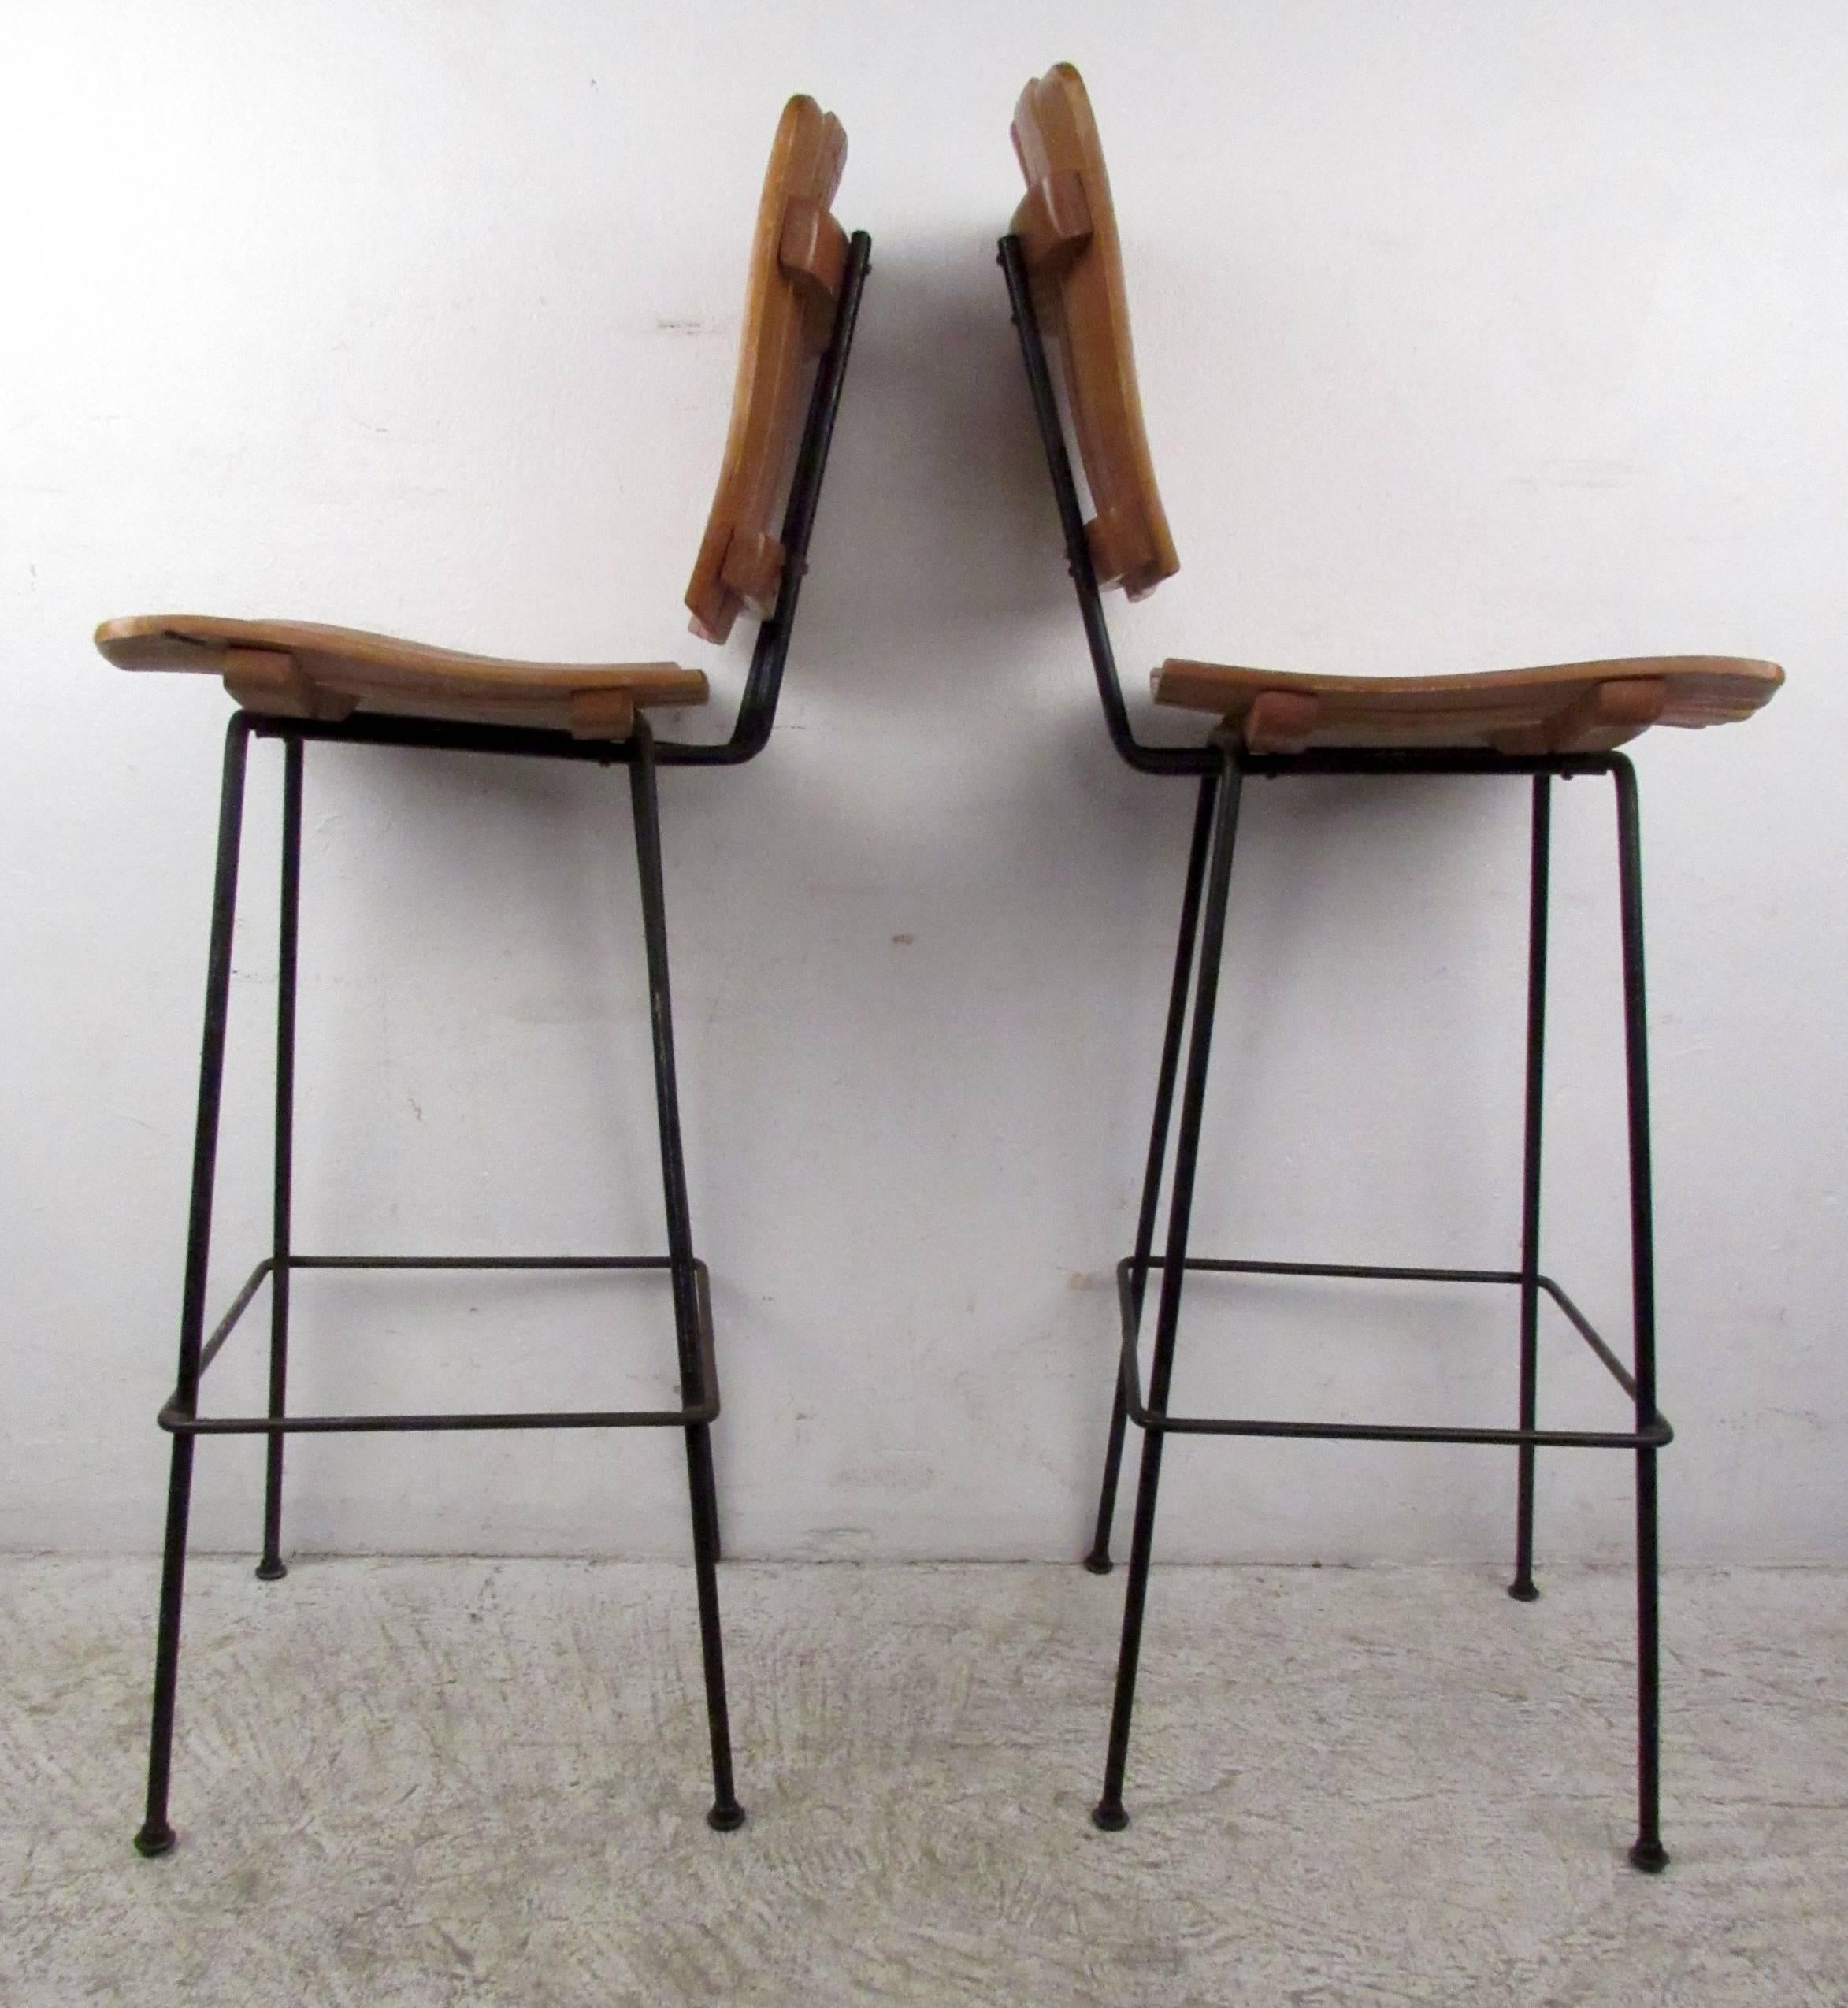 Two vintage-modern stools featuring iron bases and slat wood seat and back, designed by Arthur Umanoff.

Please confirm item location NY or NJ with dealer.